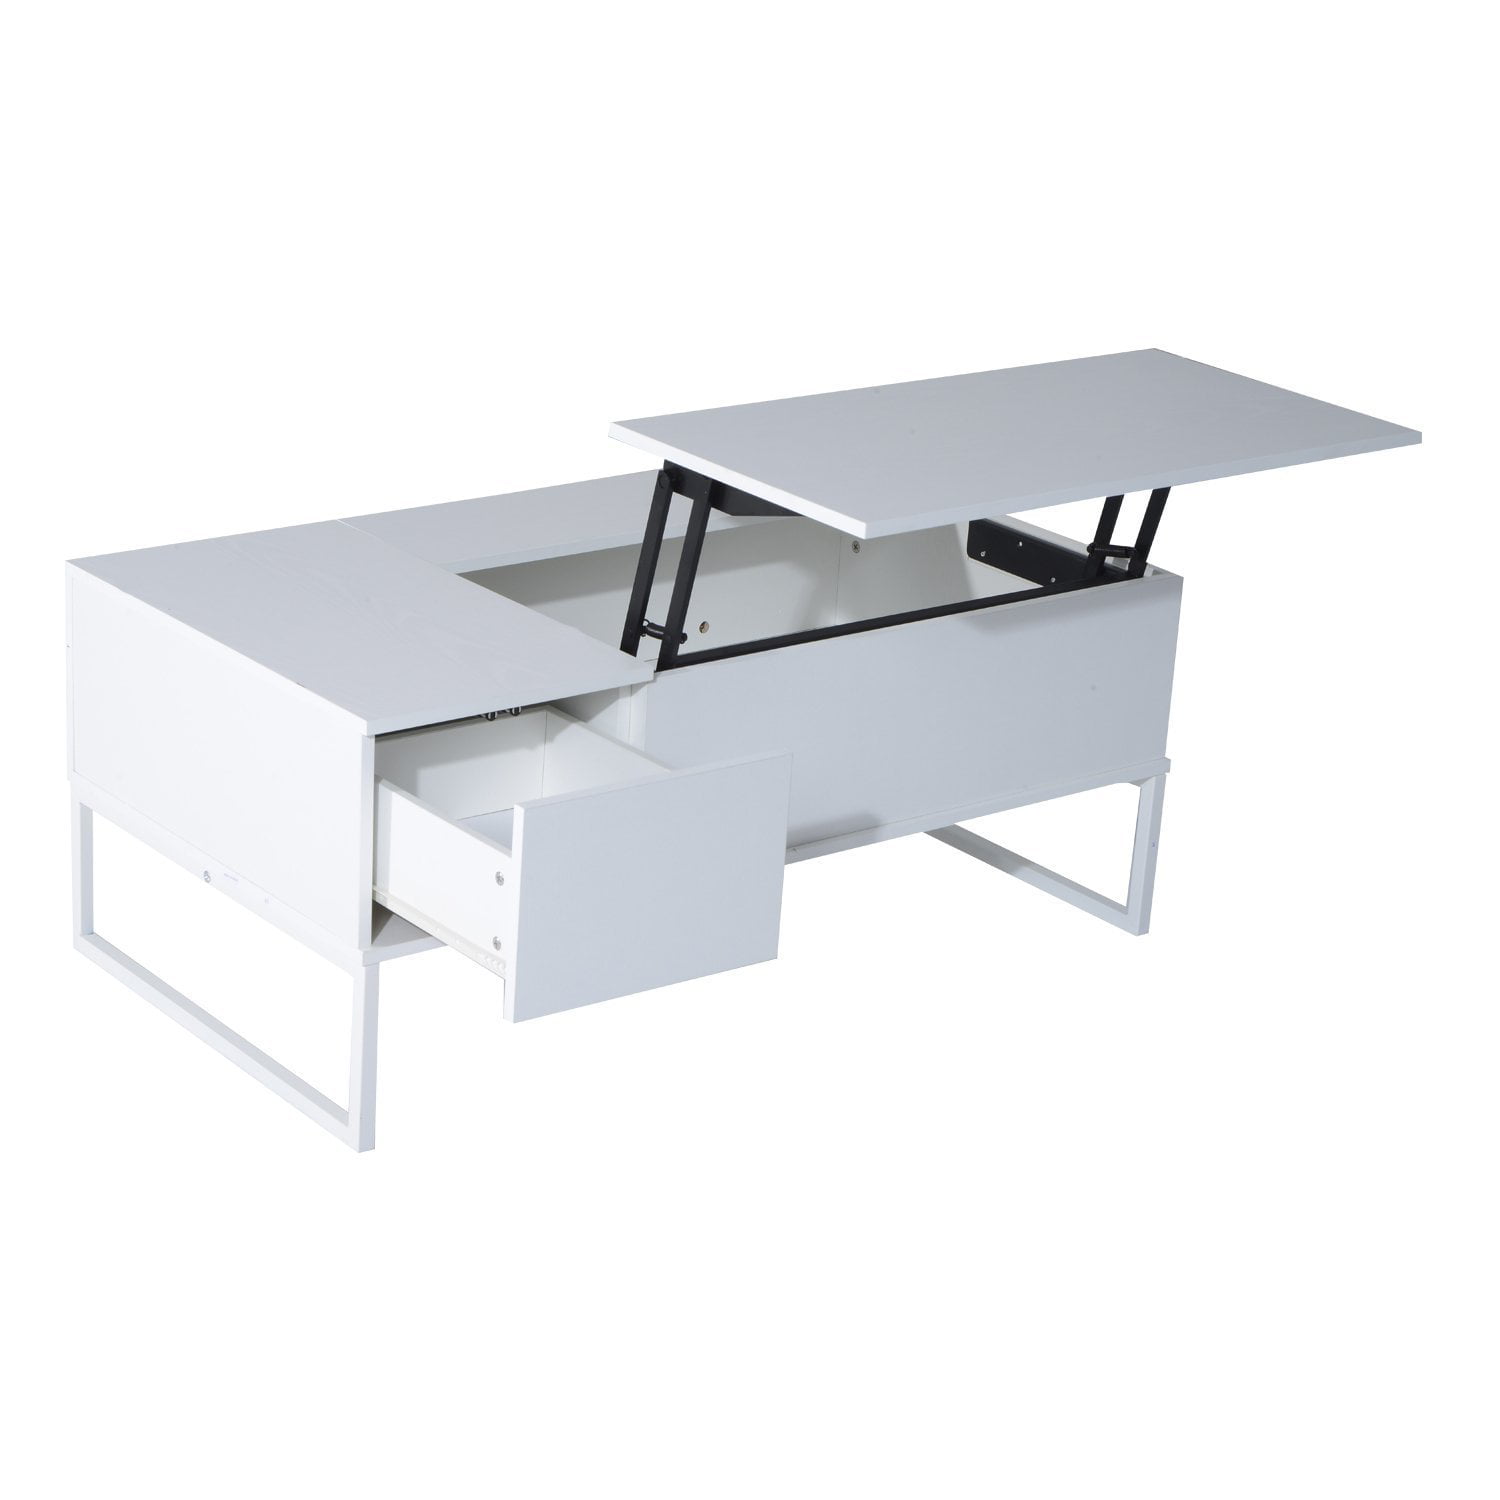 Modern Lift Top Coffee Table Hidden Compartment and Storage Drawer white - Walmart.com